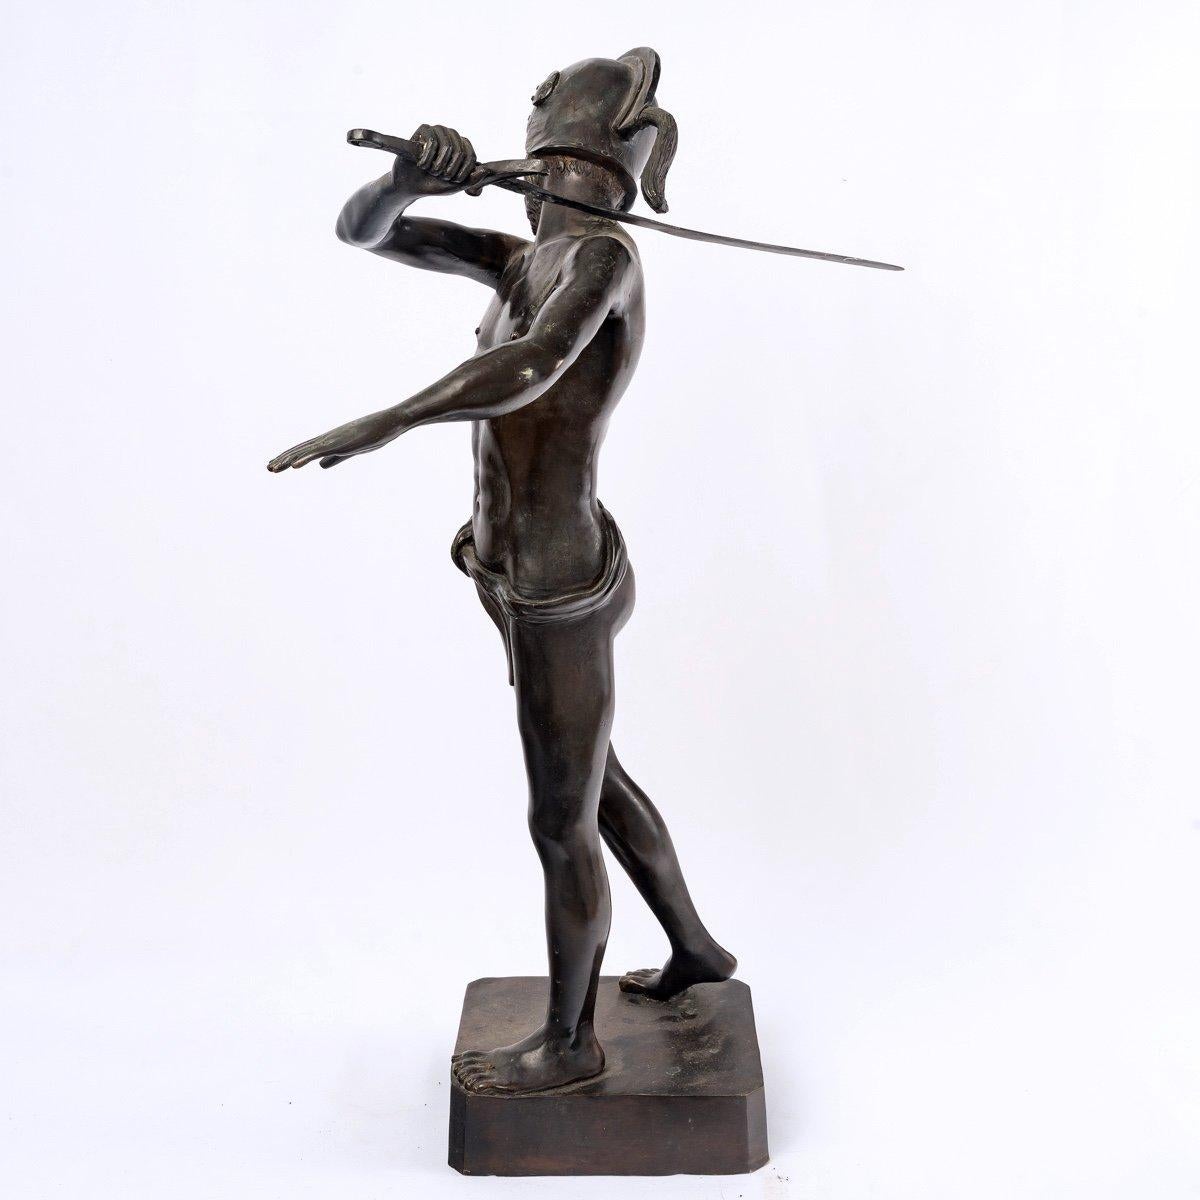 An antique French sculpture in brown patinated bronze depicting an ancient gladiator wearing a cloak and wielding a sword.
This very fine representation is attributed to Émile Louis Picault.

Period : 19th Century
Dimensions: Height: 64cm x Width: